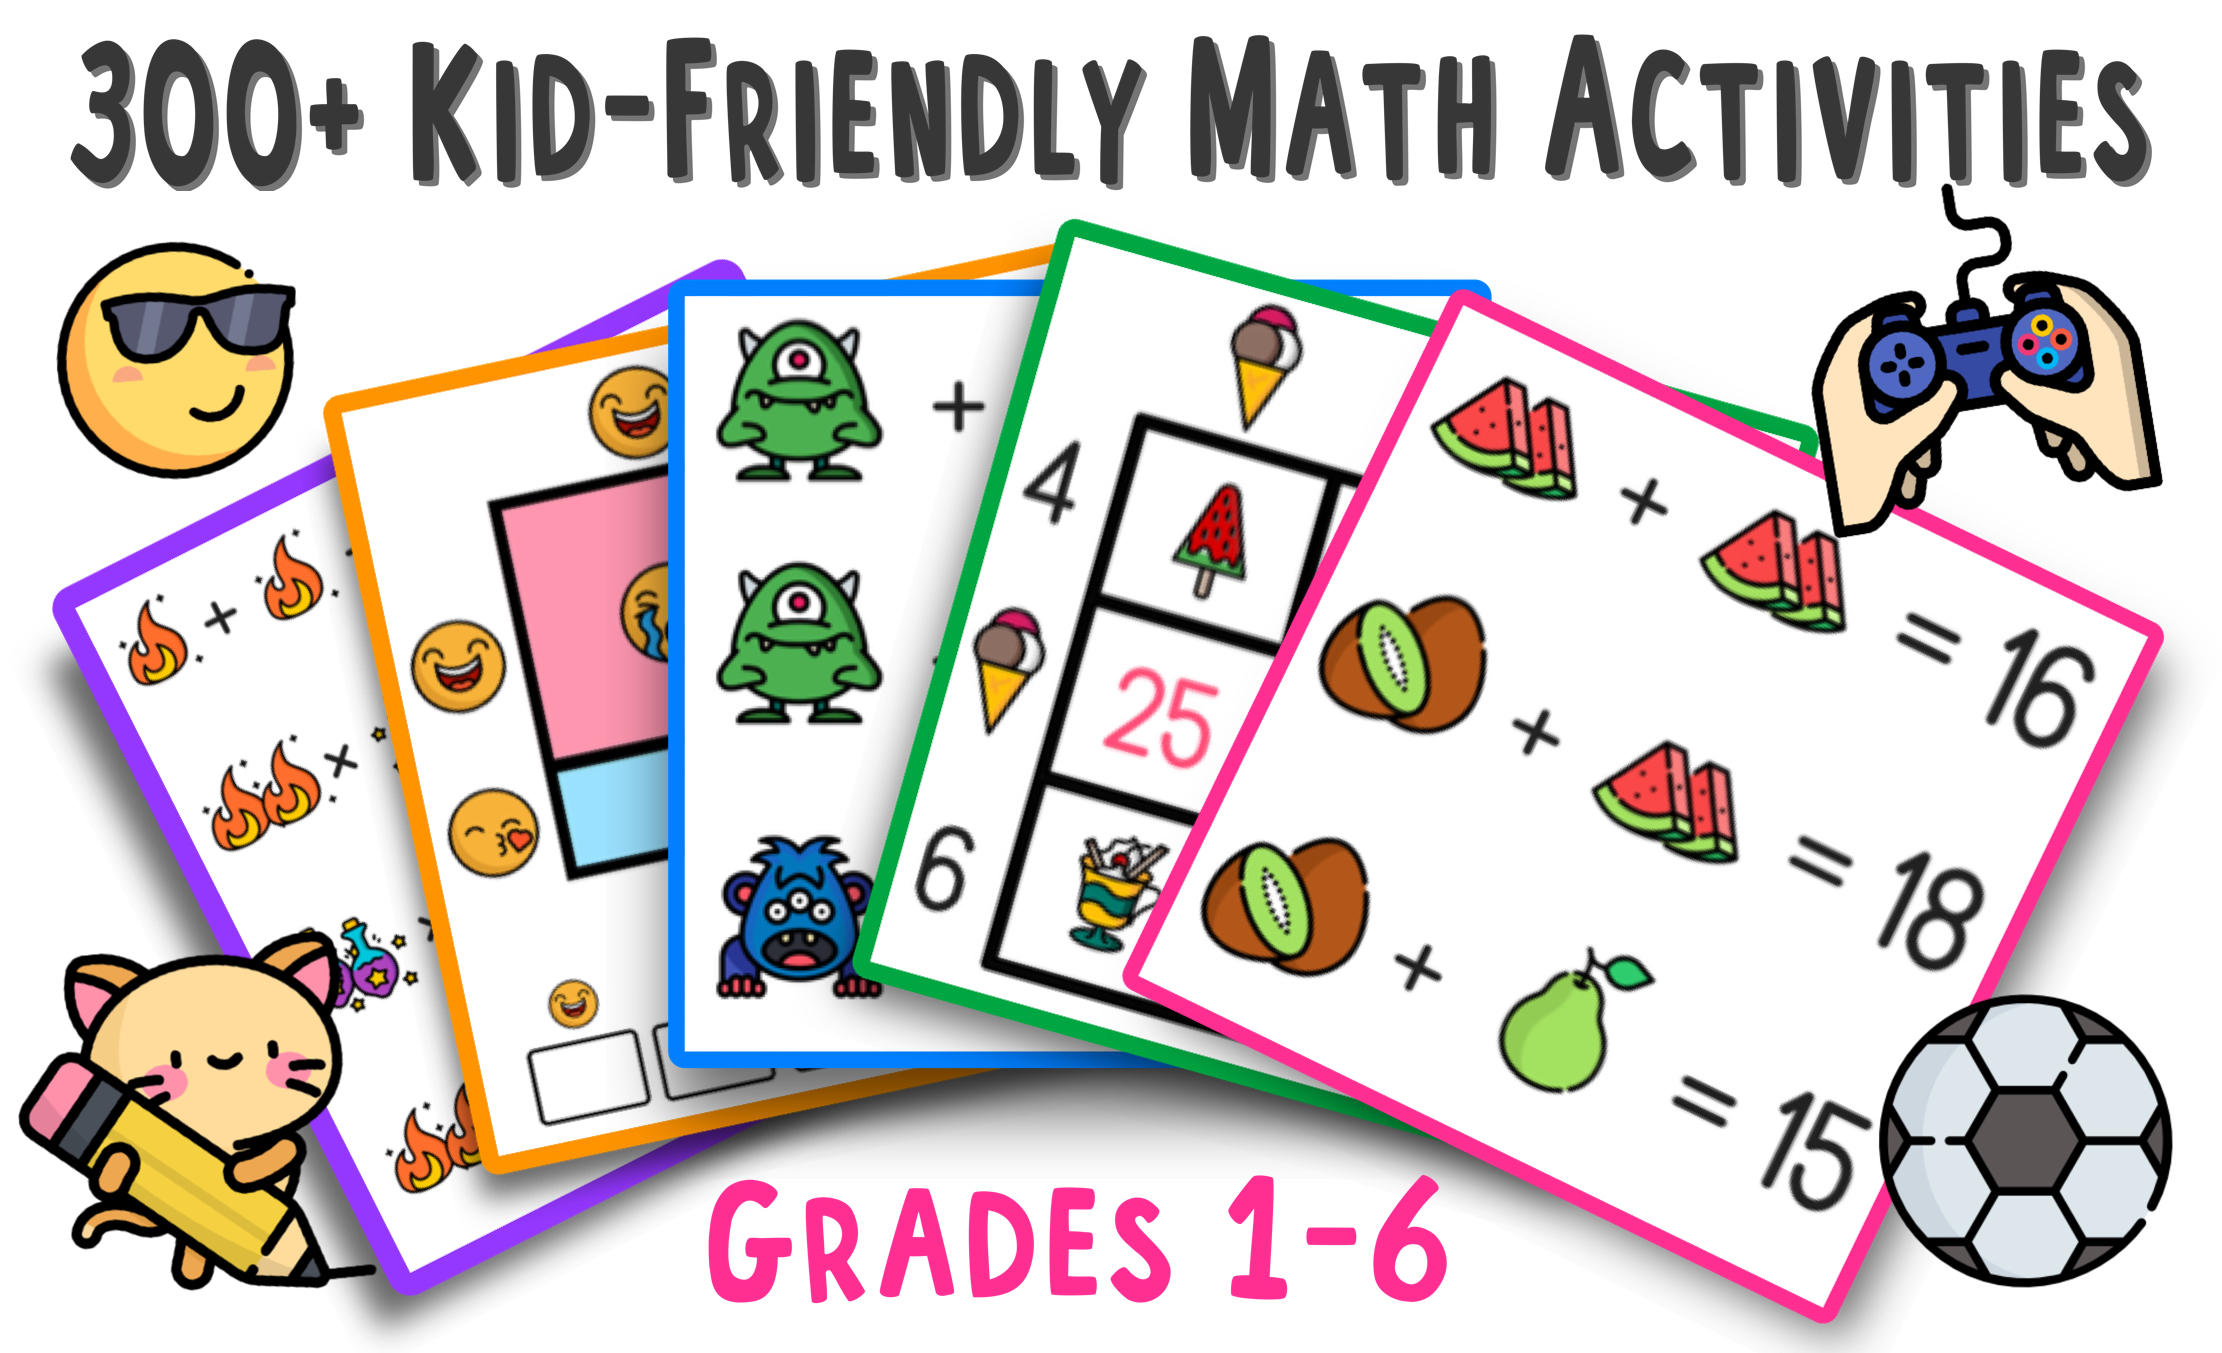 Play cool math game for toddlers and kids